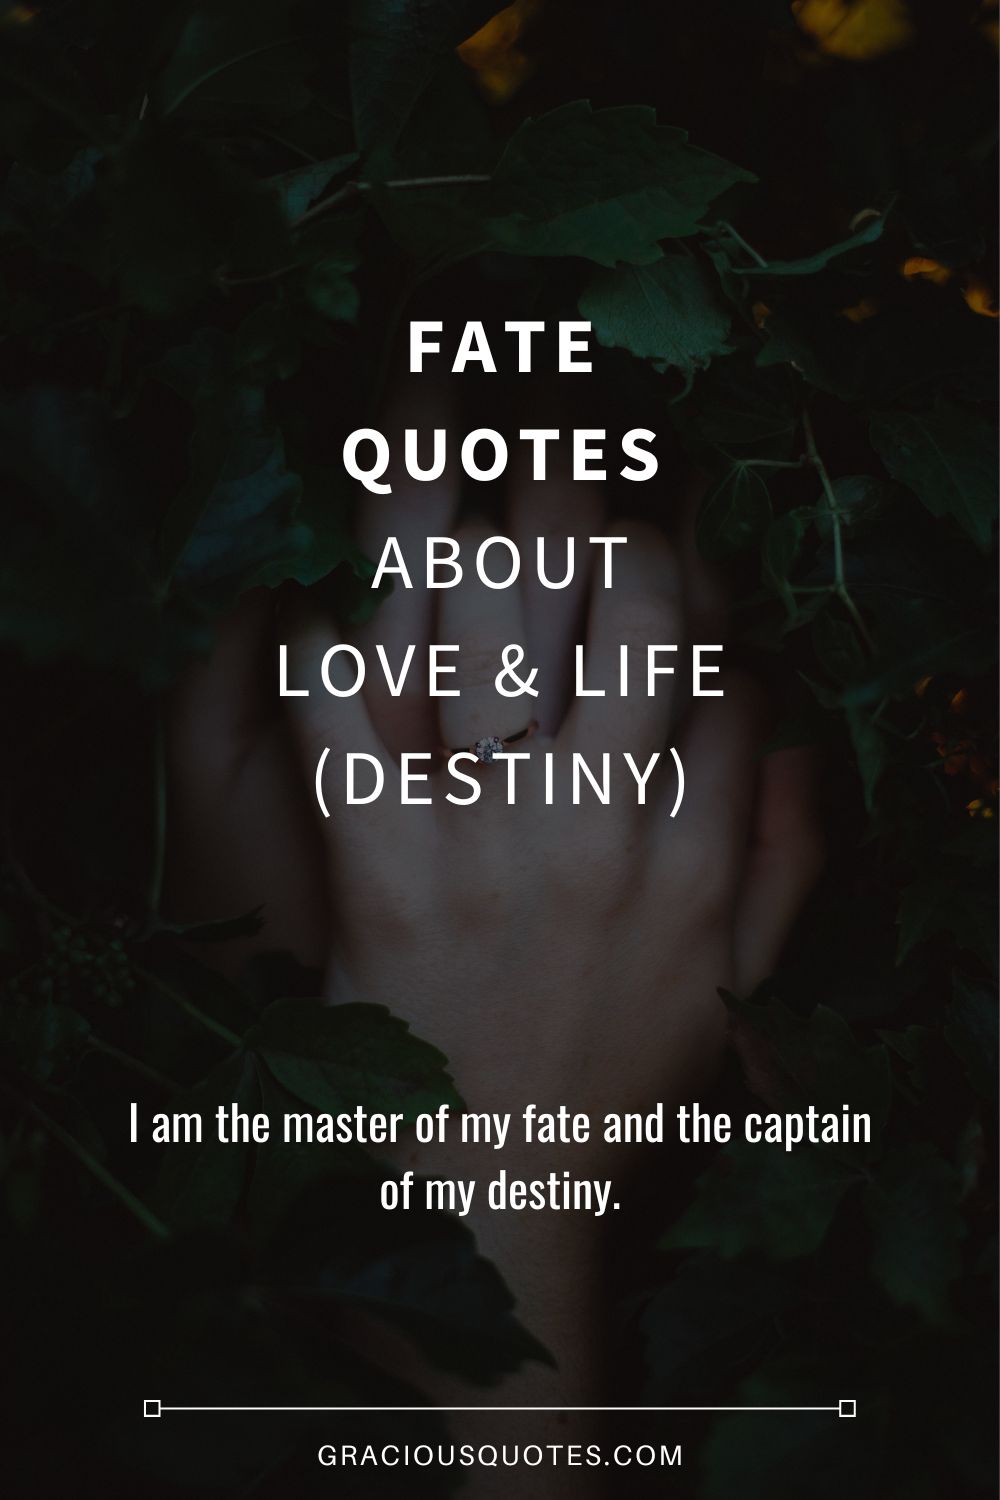 Fate Quotes About Love & Life (DESTINY) - Gracious Quotes